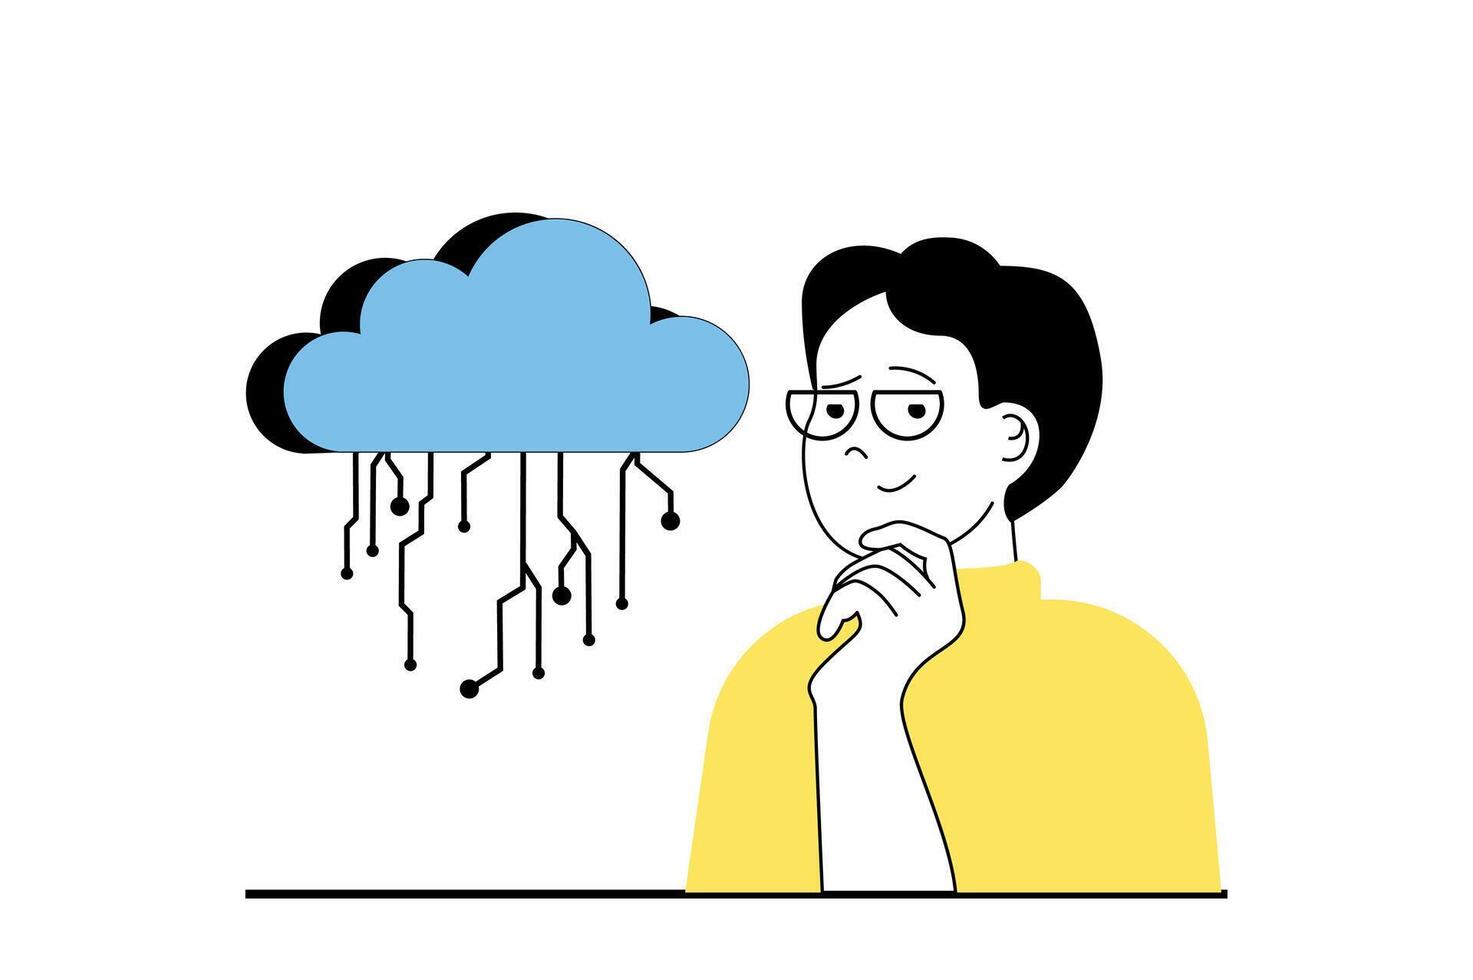 Cloud computing concept with people scene in flat web design. Man using cloud storage and processing with online database and hosting. Vector illustration for social media banner, marketing material.